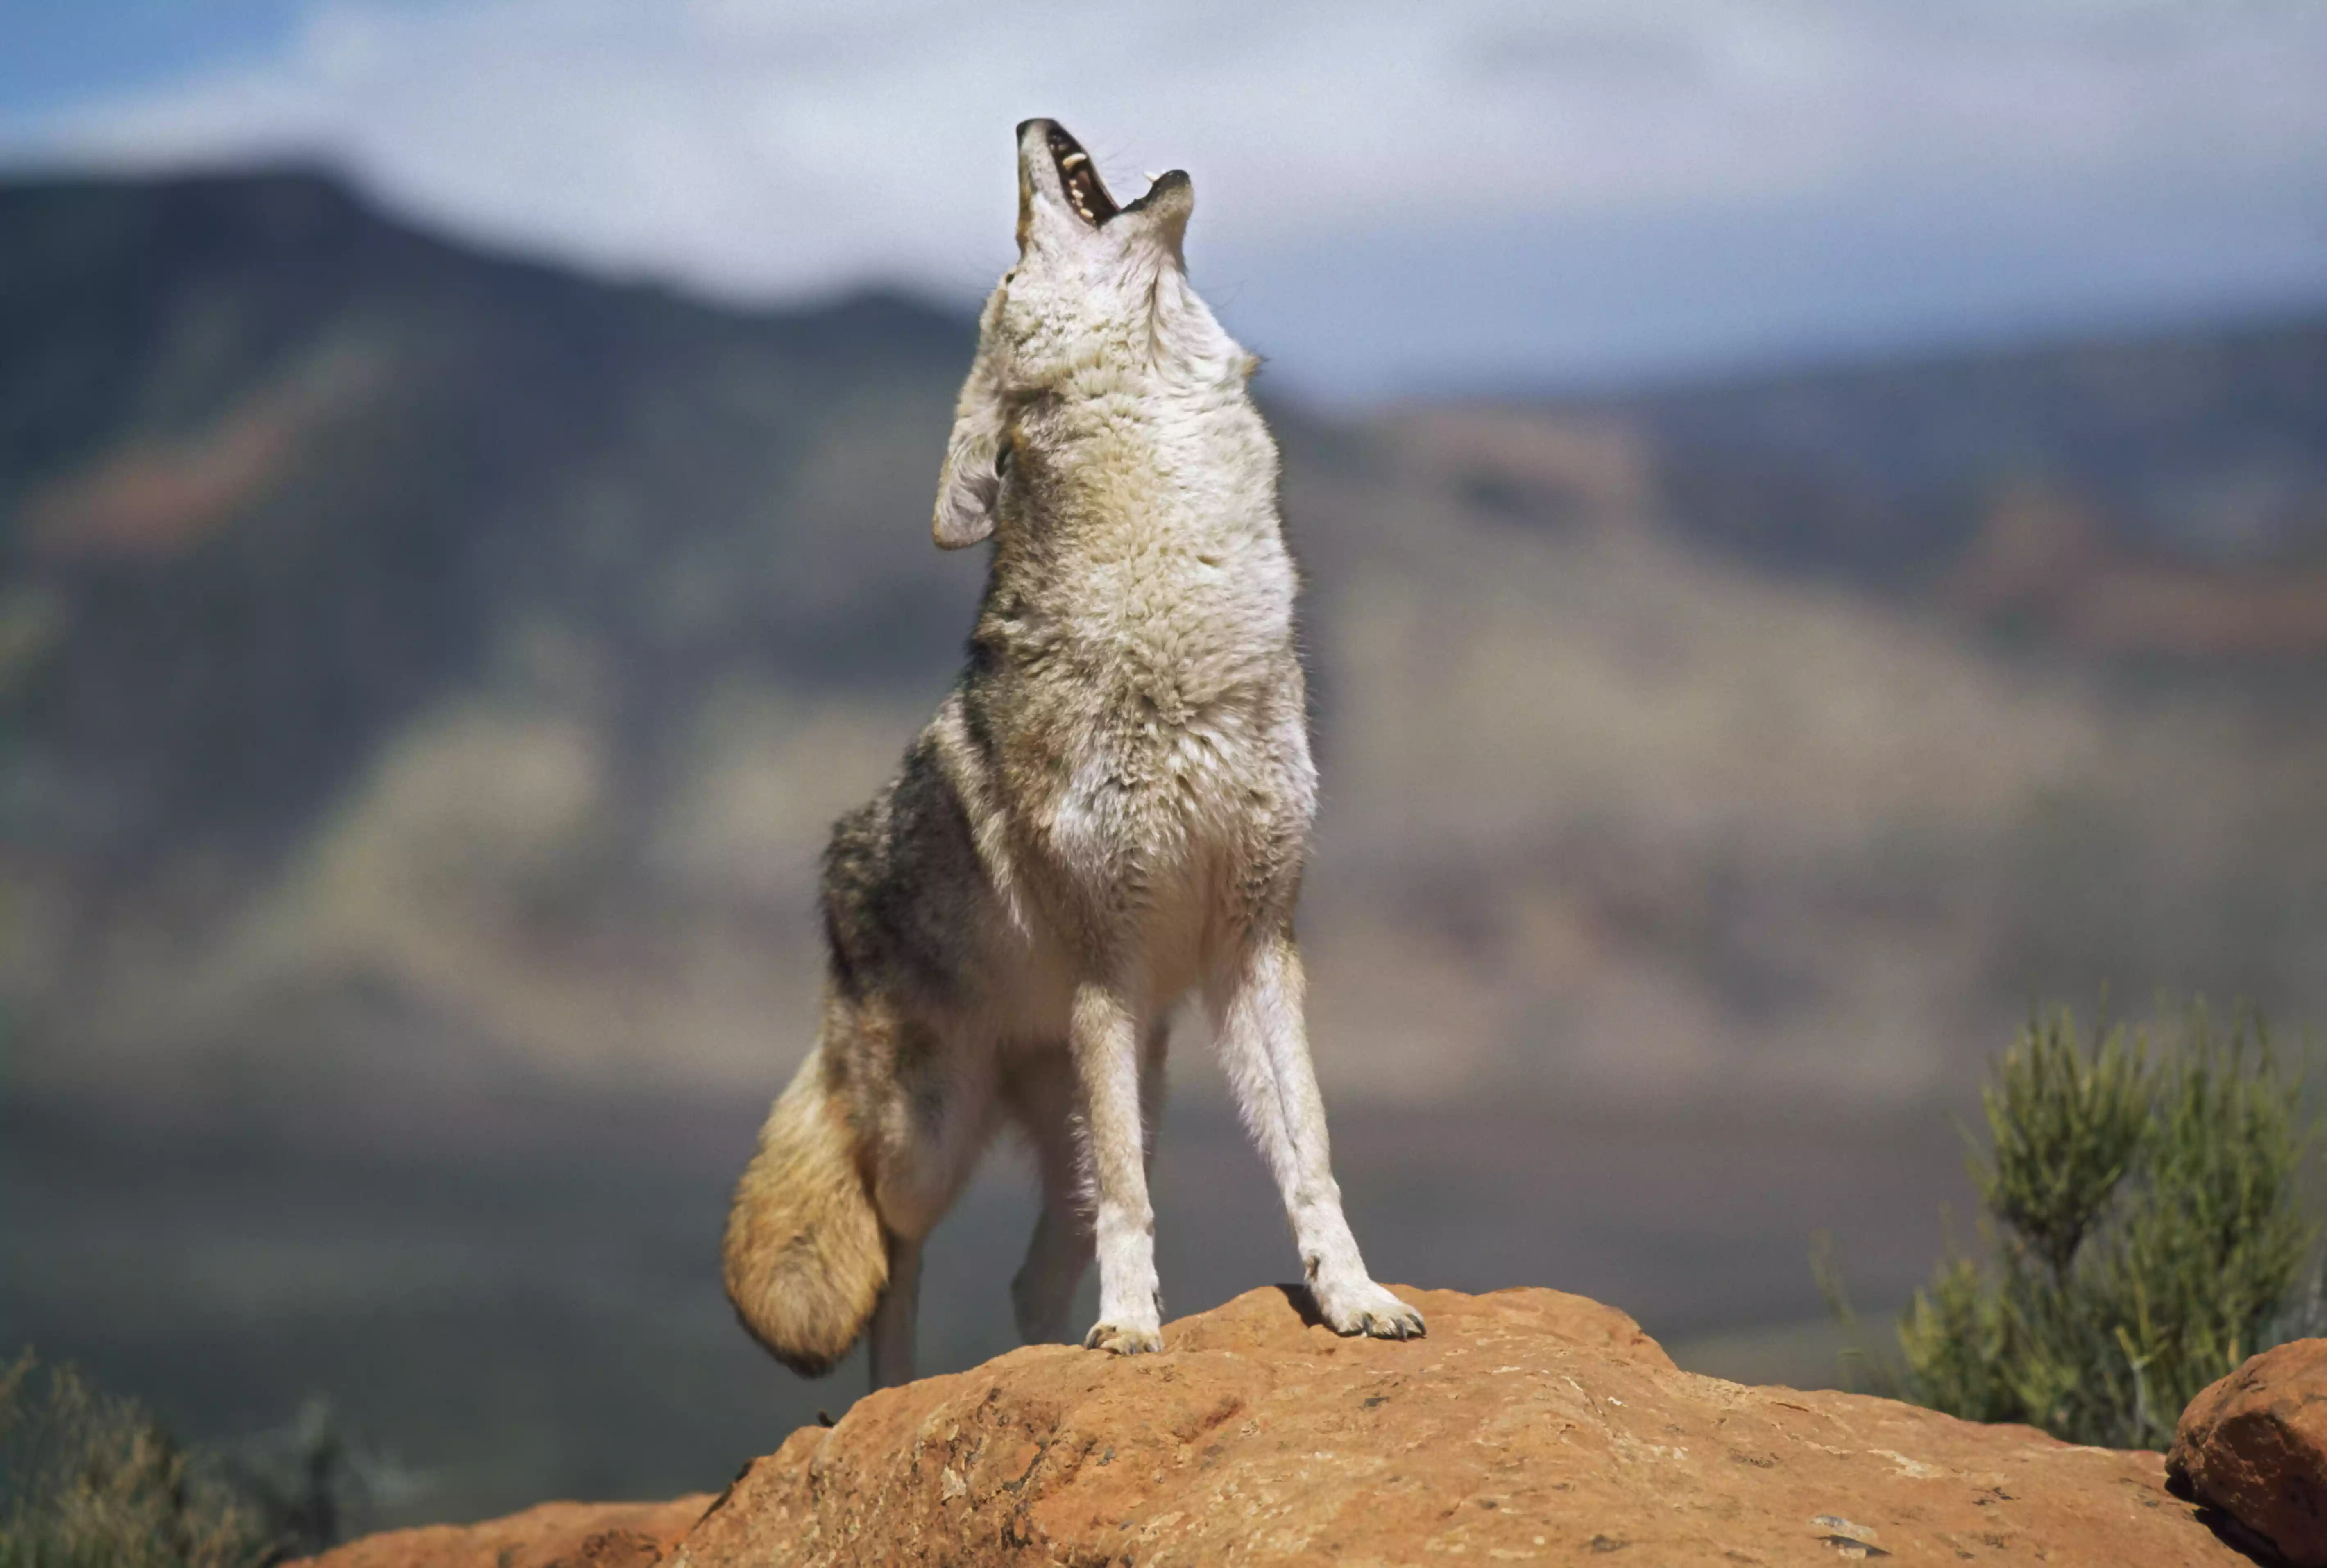 Coyote (Canis Latrans) Howling From High Point On Red Sandstone